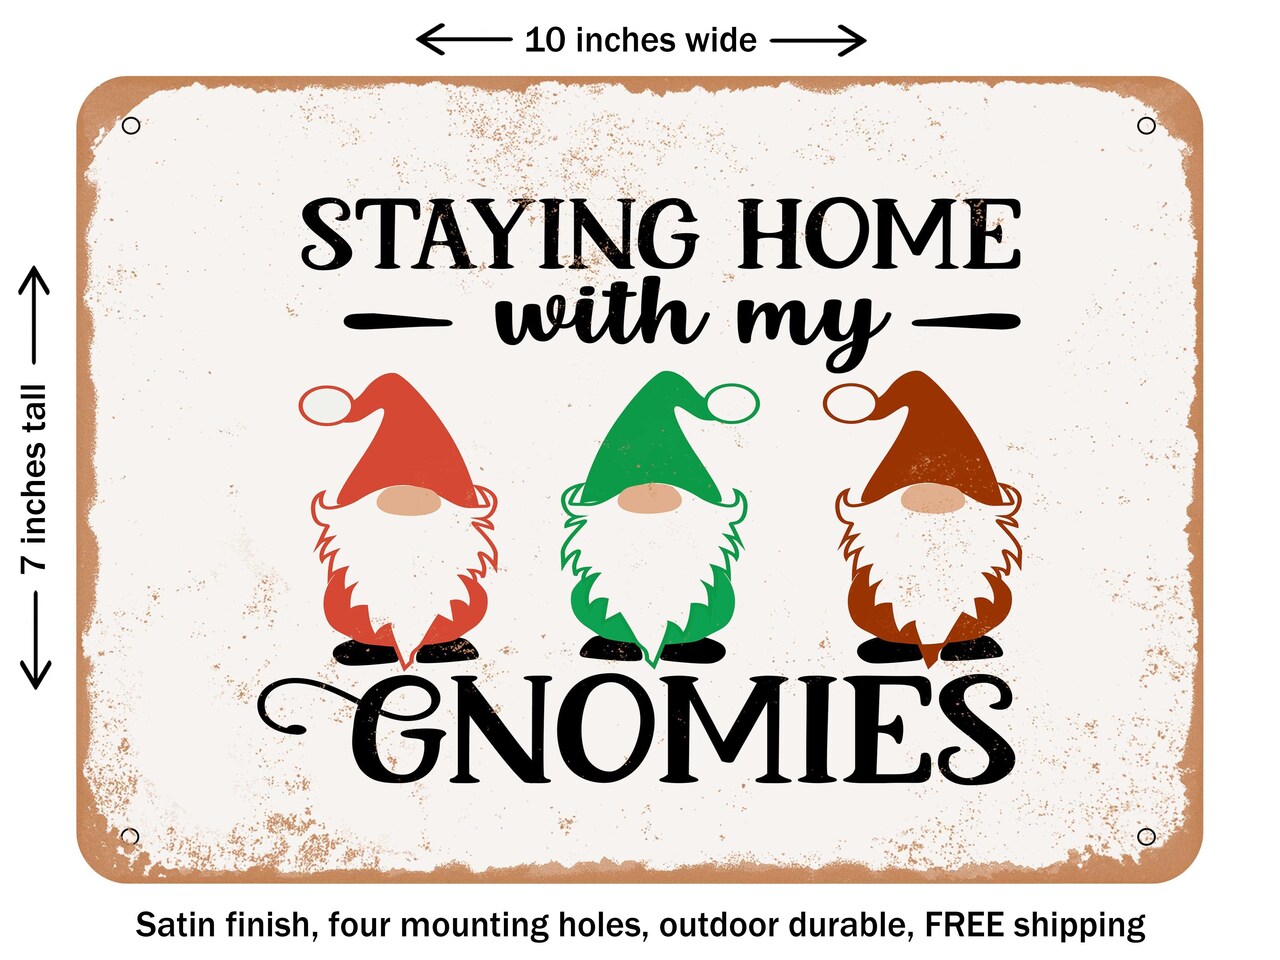 DECORATIVE METAL SIGN - Staying Home With My Gnomies - 2 - Vintage Rusty Look